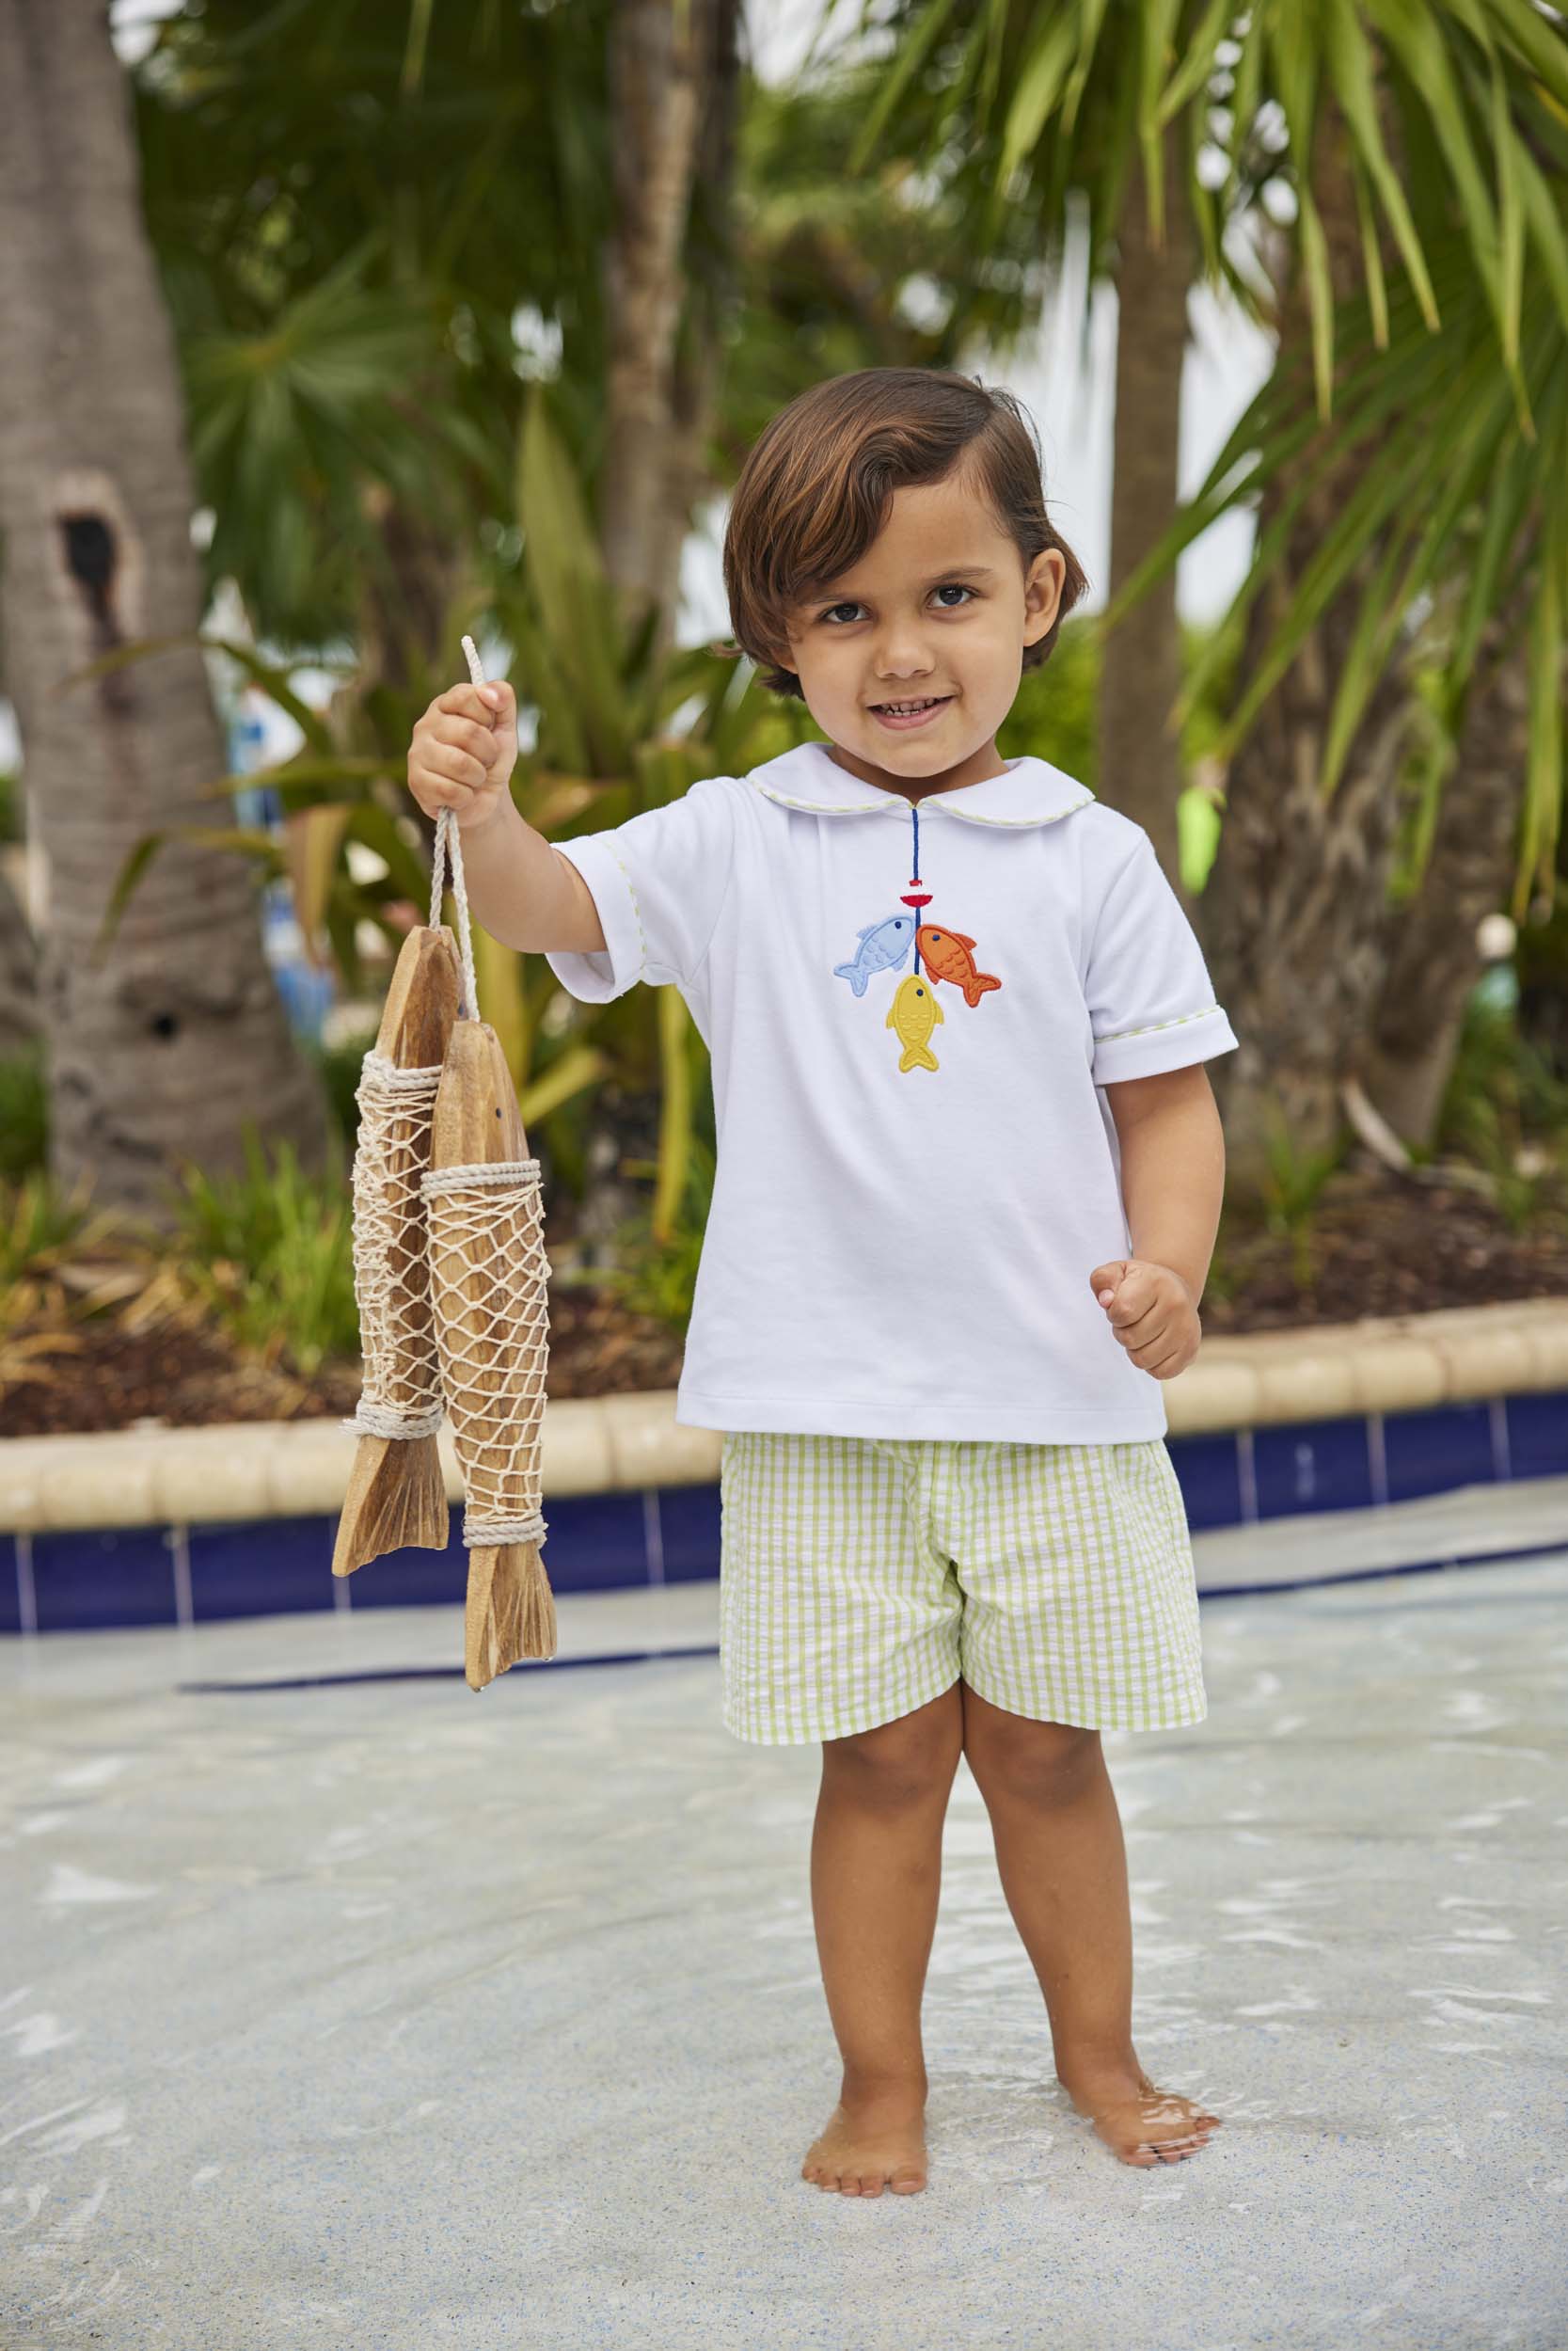 classic childrens clothing boy short set with green gingham shorts and white peter pan shirt with applique fish 